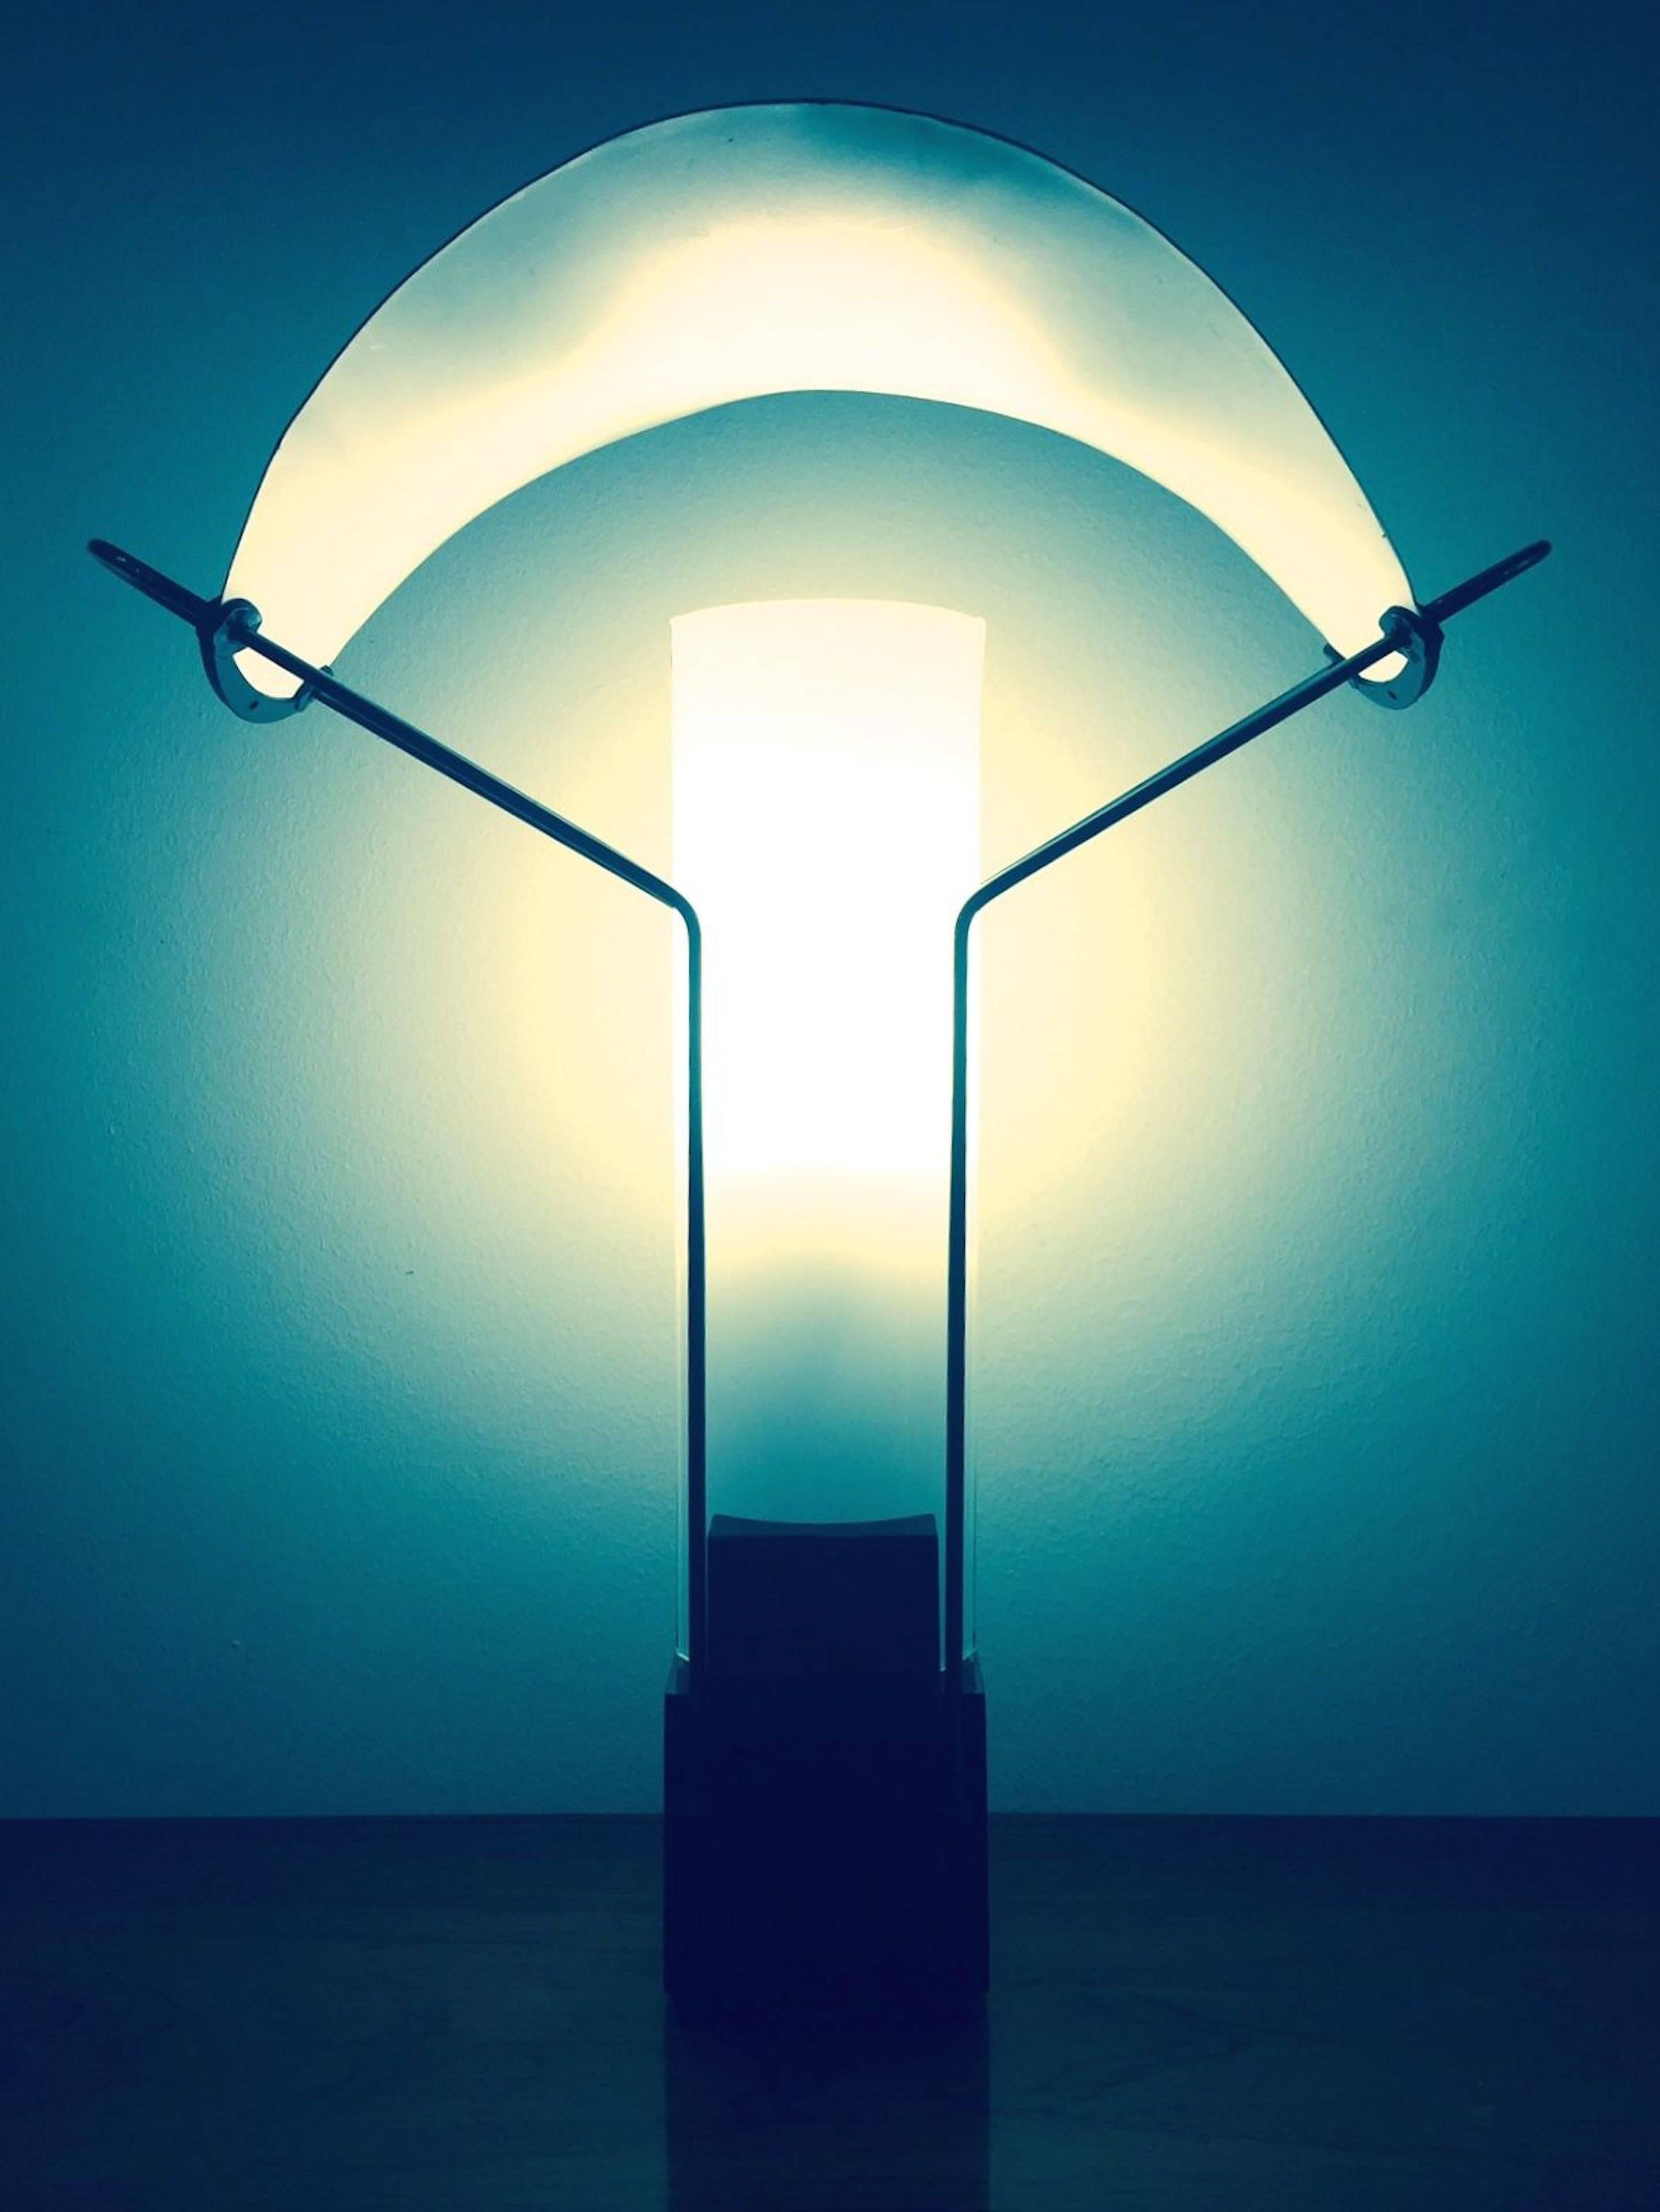 A table lamp designed by Perry King and Santiago Miralda for Arteluce in 1985. Metal base, opaline glass and copper shade.